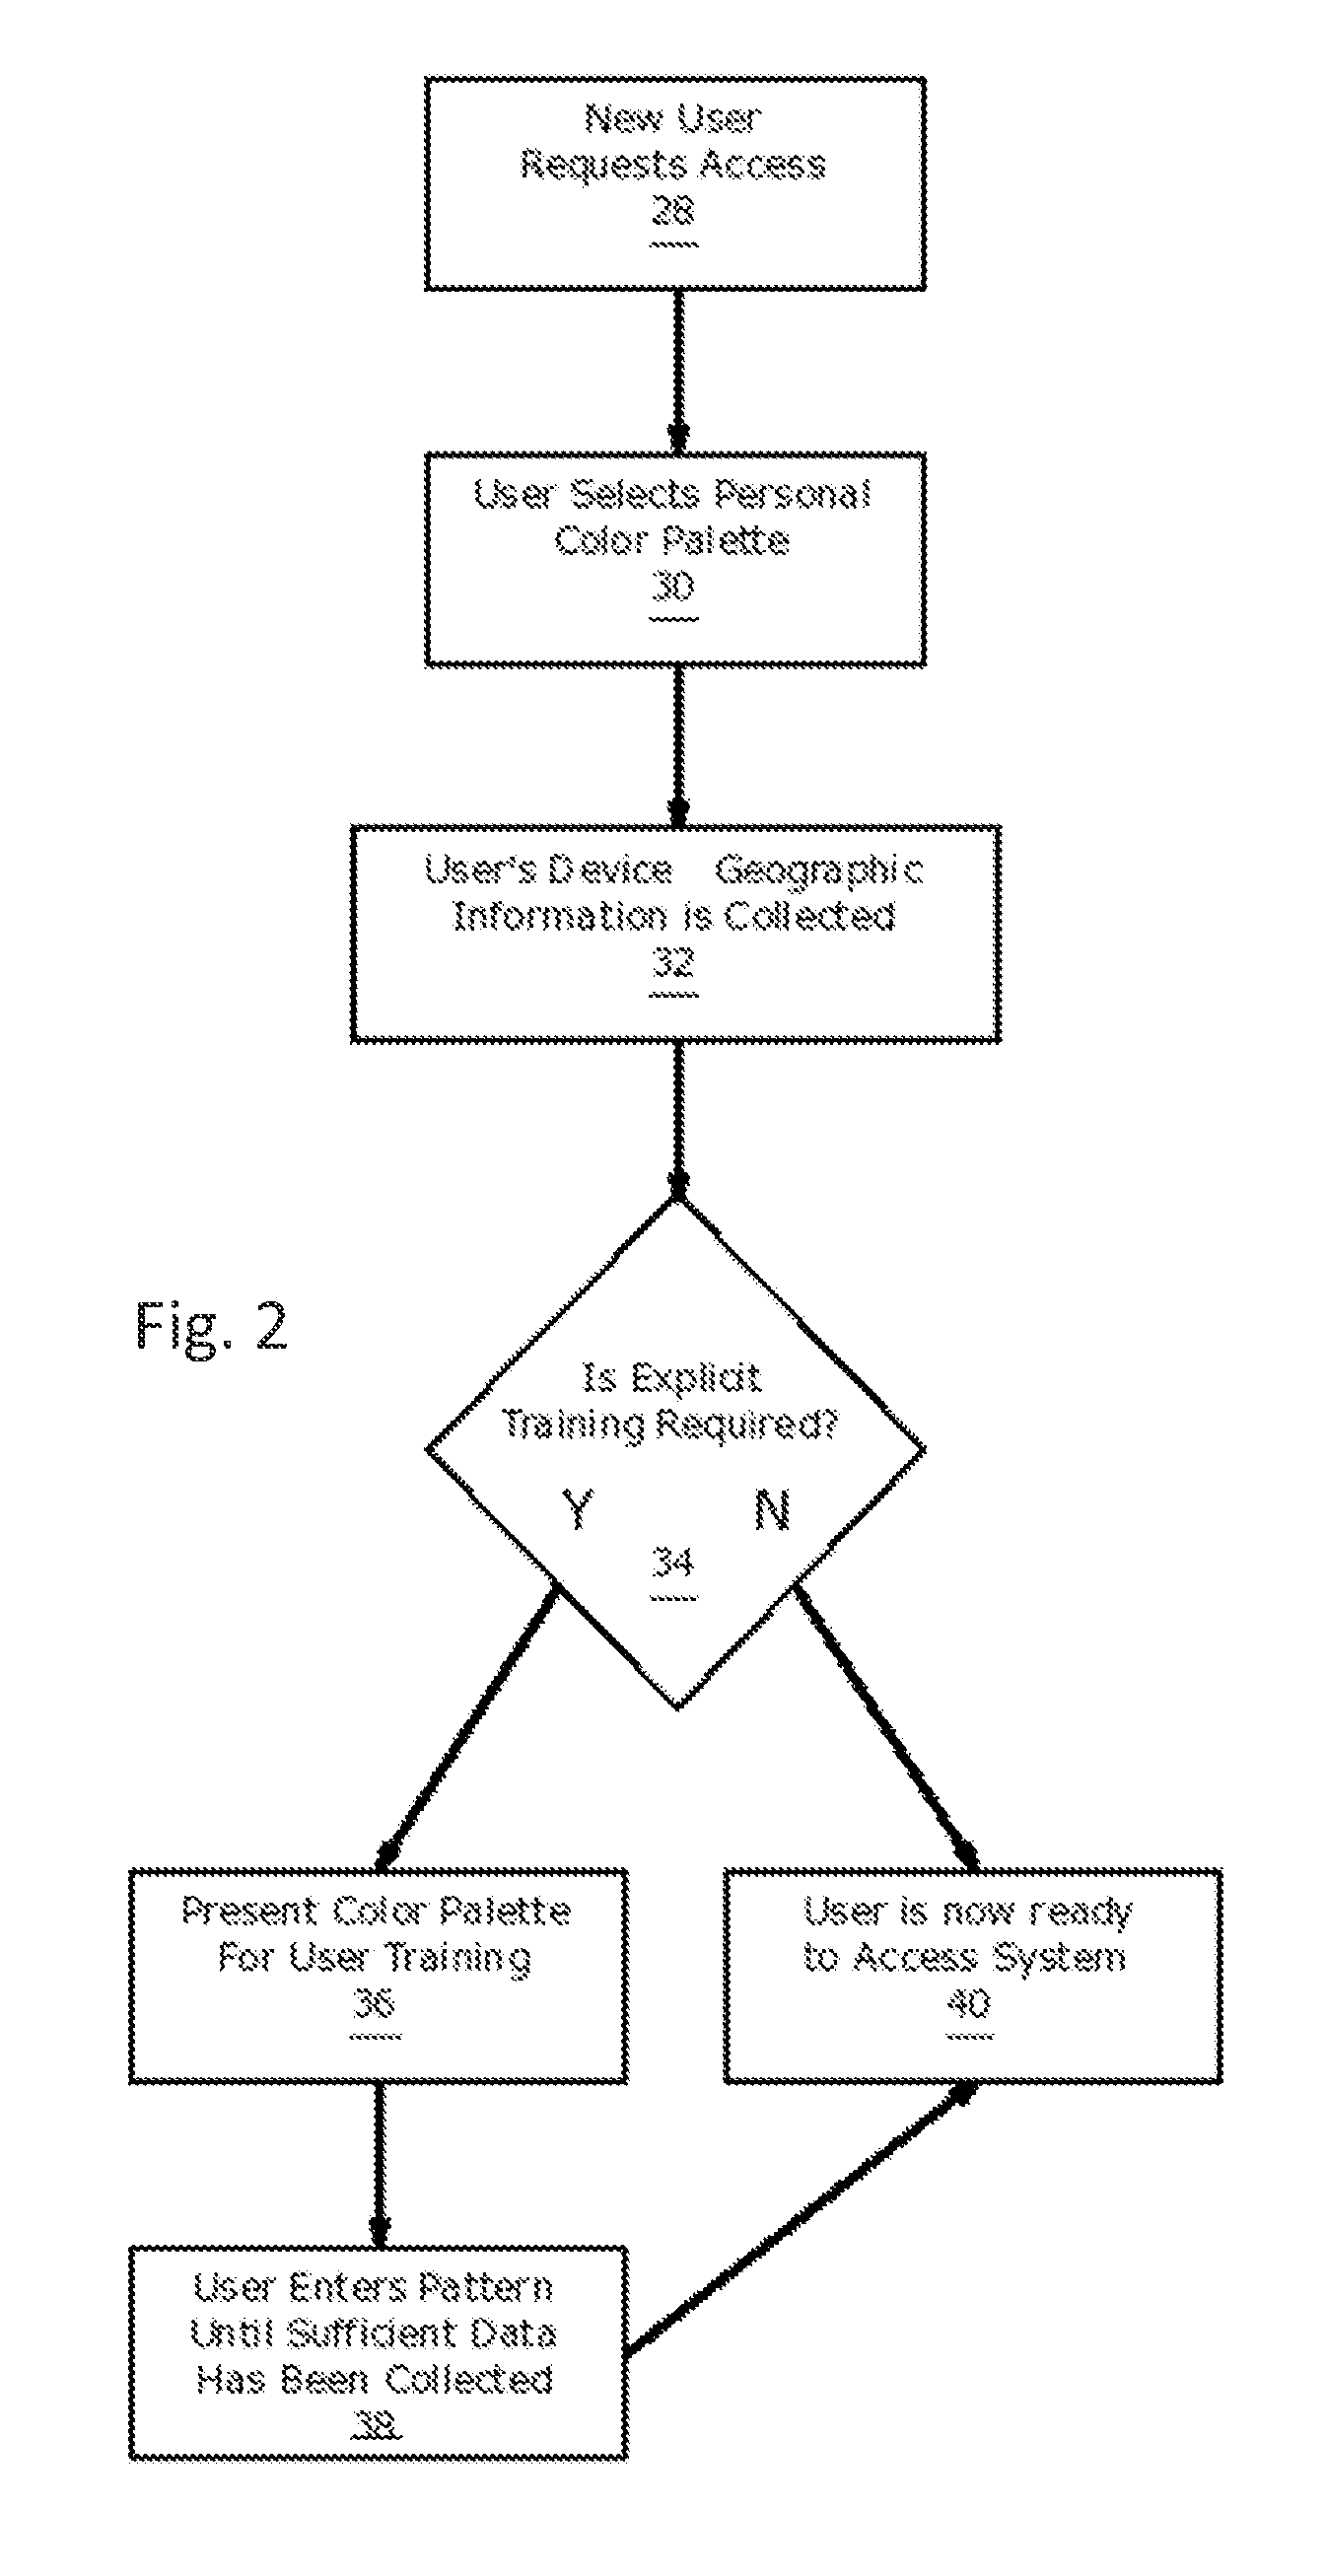 Visual authentication and authorization for mobile devices